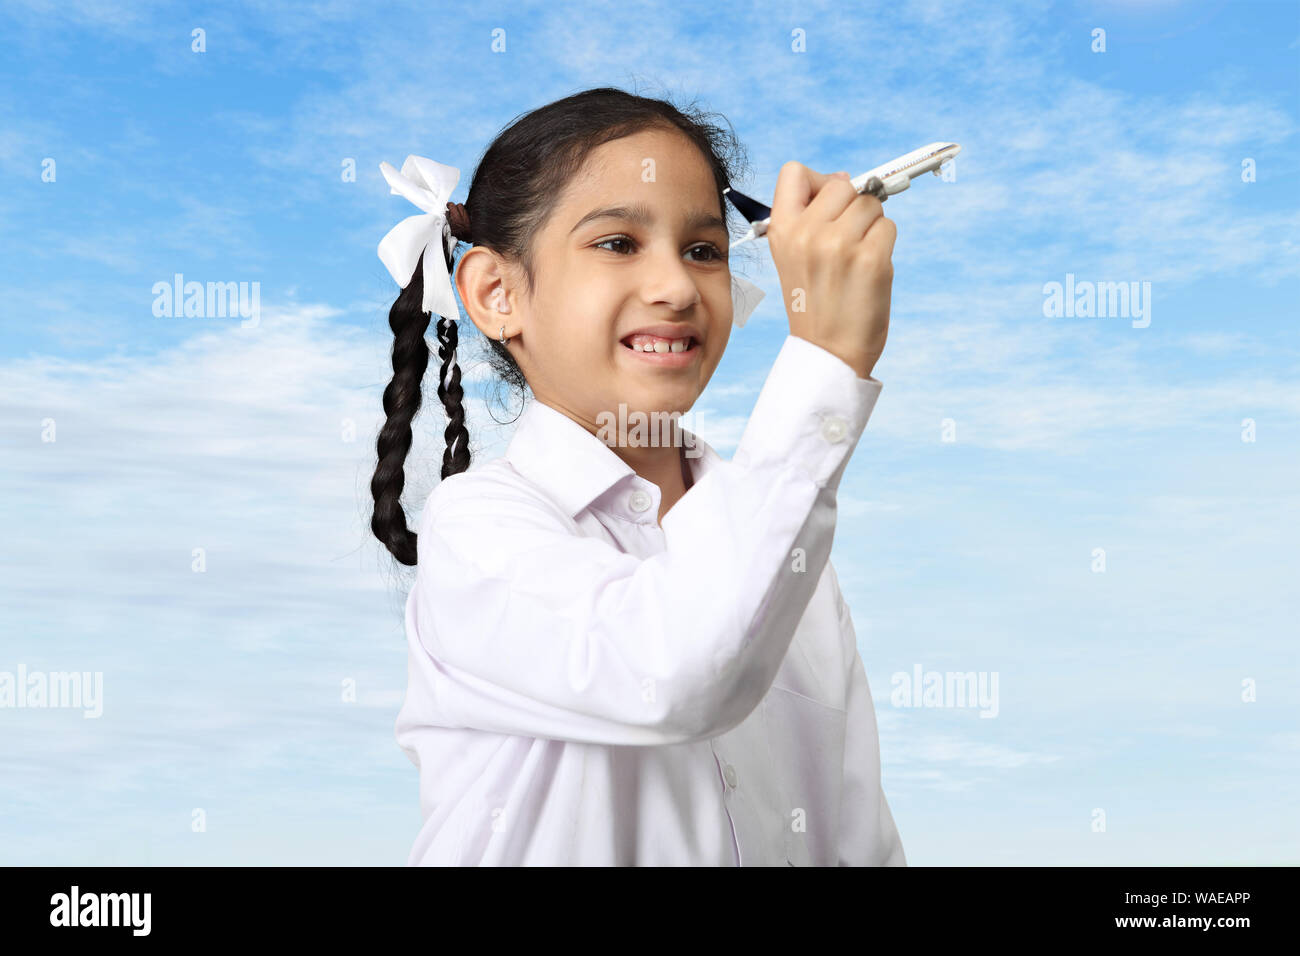 Girl pretending to be a pilot playing with model airplane Stock Photo